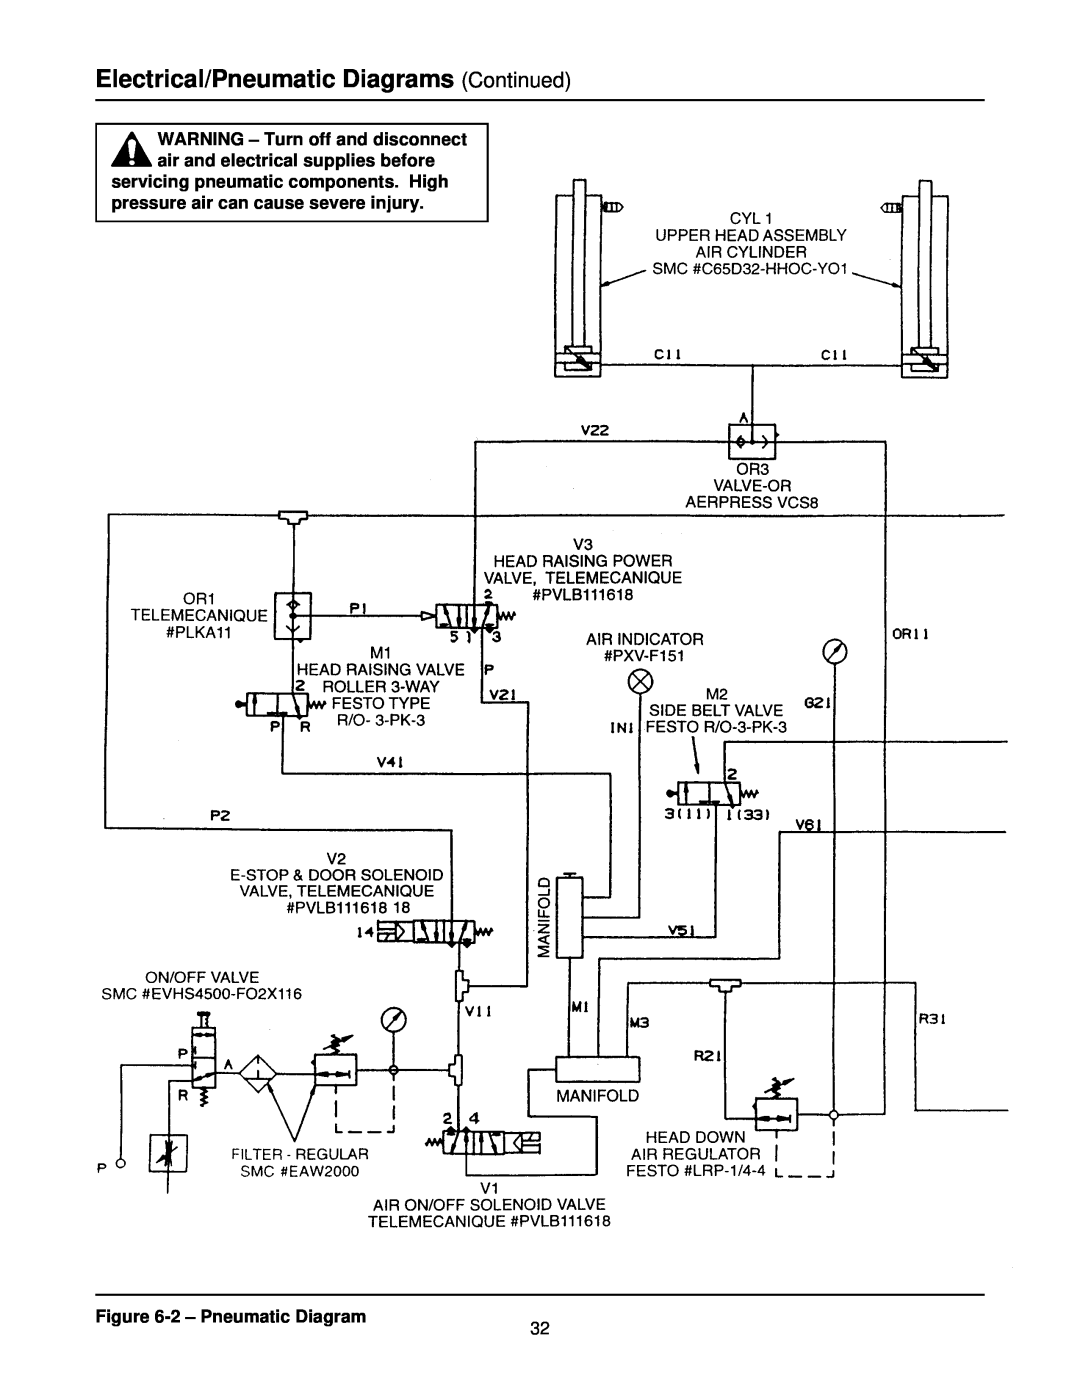 3M 800r3 Electrical/Pneumatic Diagrams Continued, WARNING - Turn off and disconnect air and electrical supplies before 